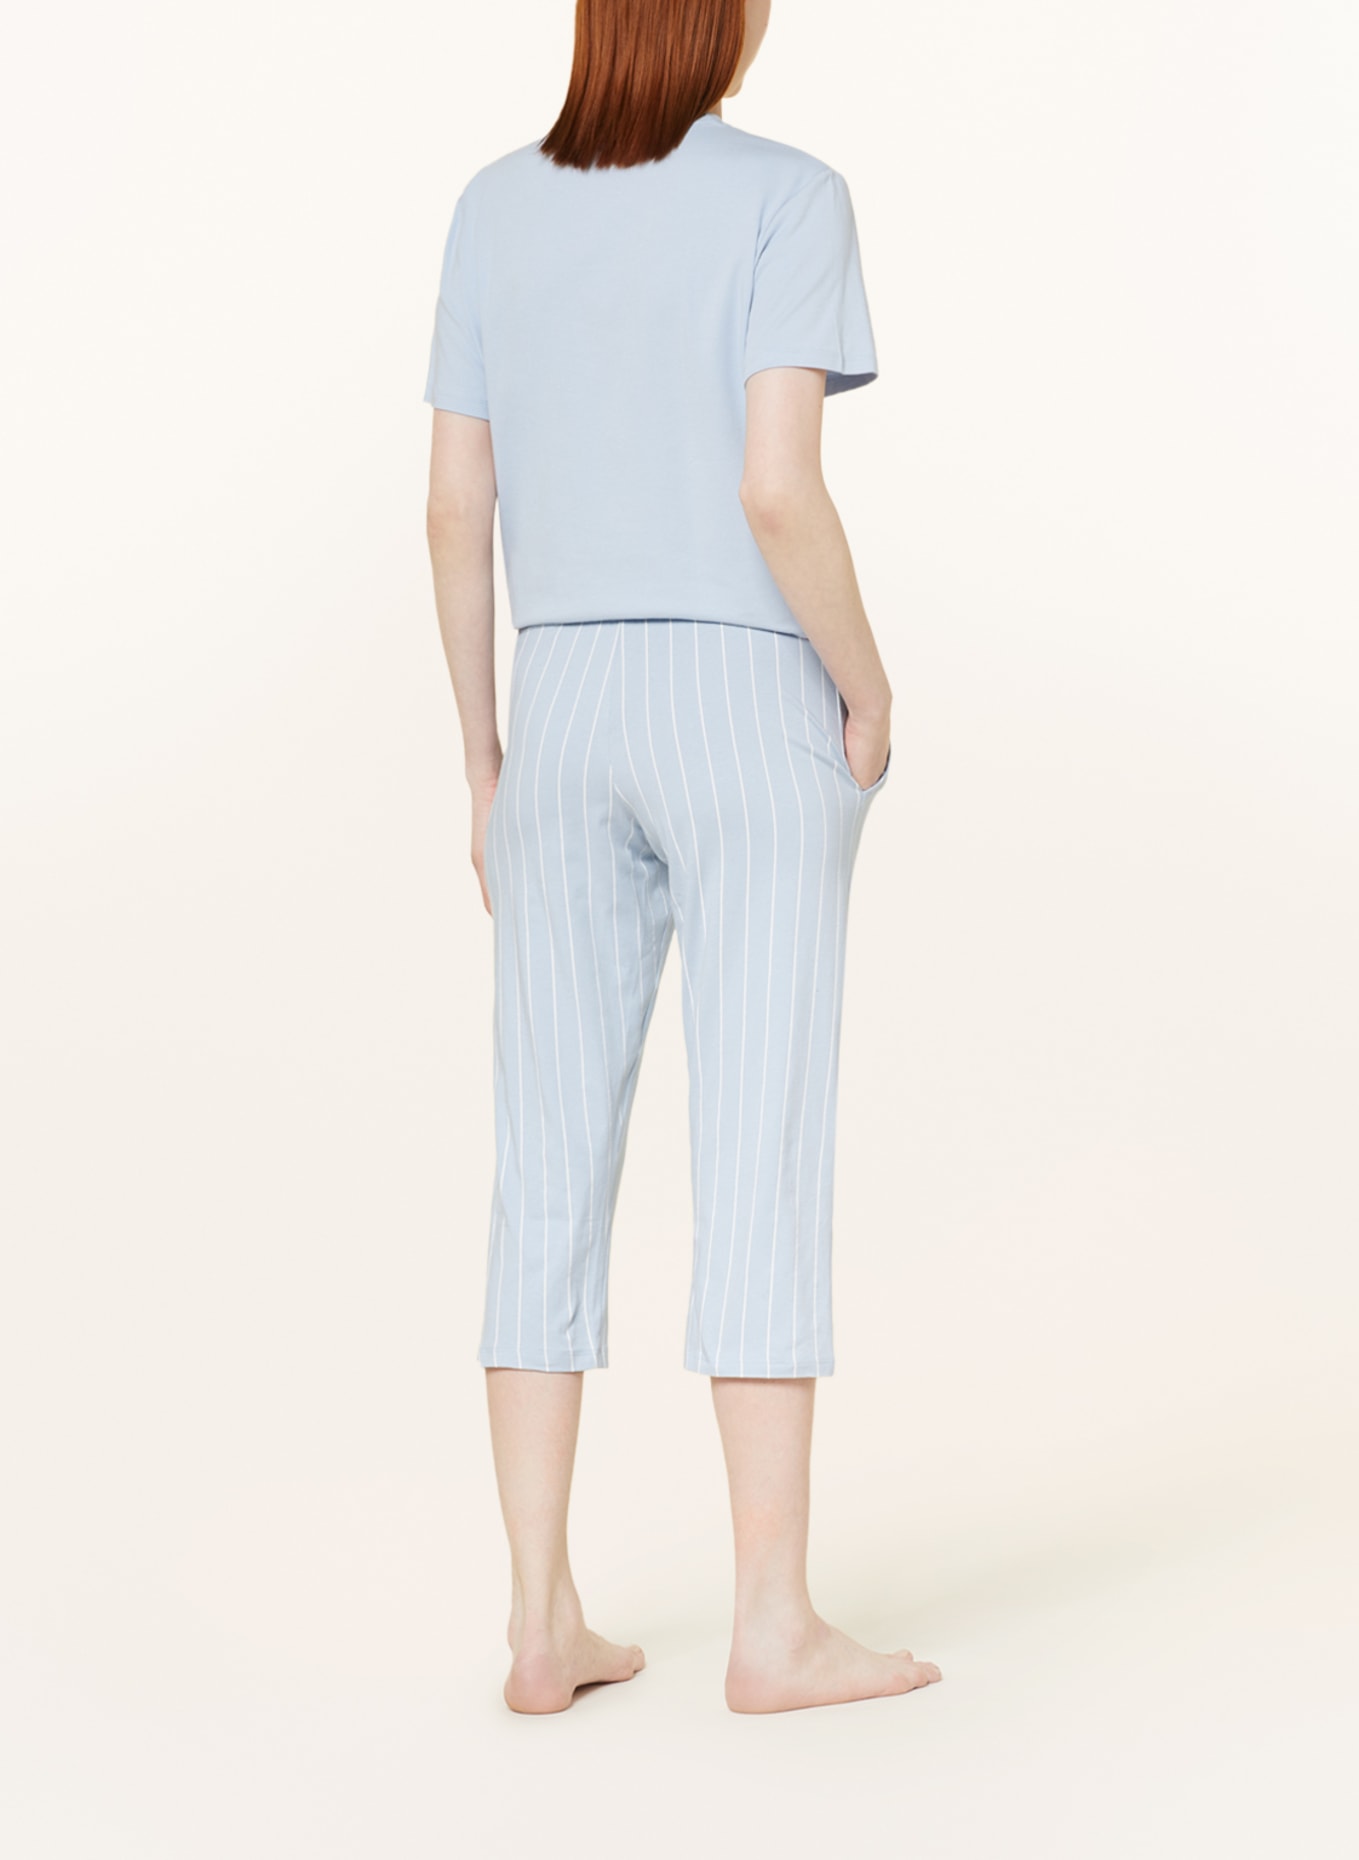 SCHIESSER 3/4 pajama pants MIX+RELAX, Color: LIGHT BLUE/ WHITE (Image 3)